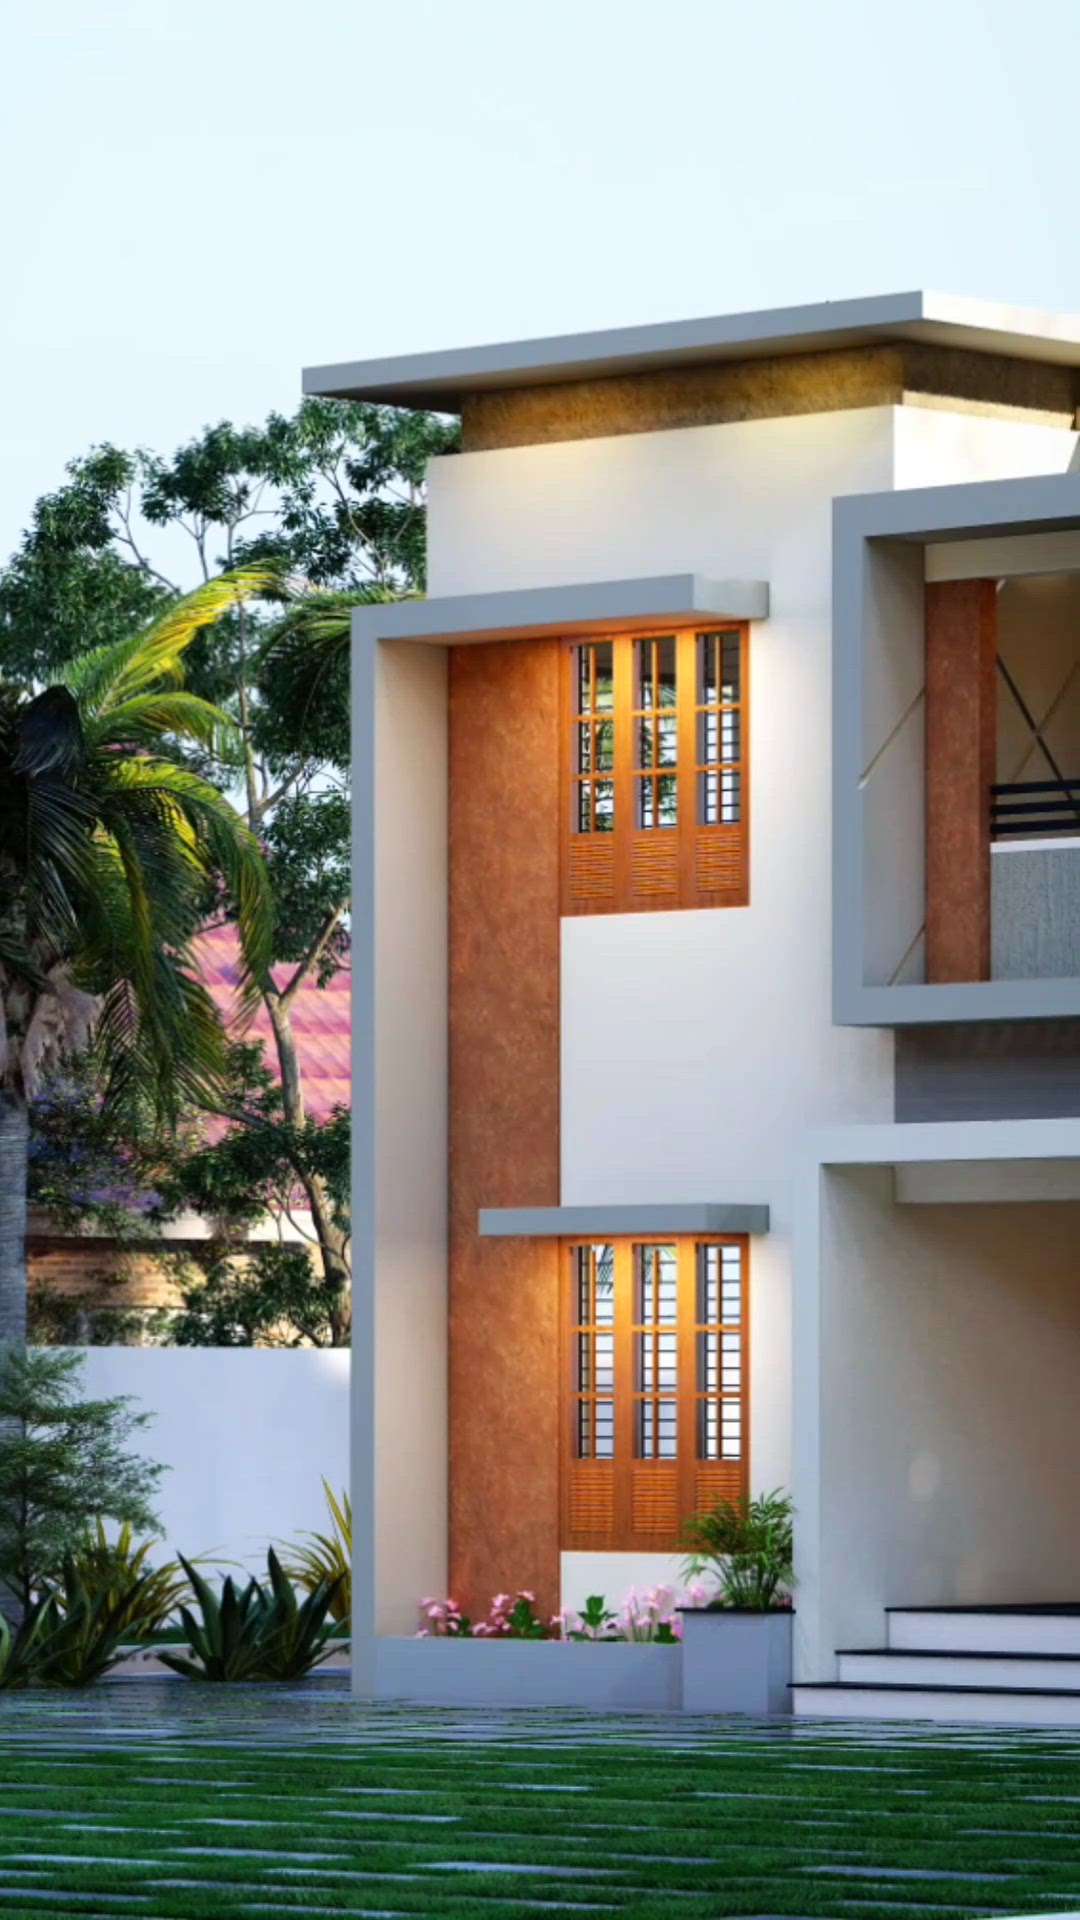 🏠 ✨ Exterior view....
Area __ 1670sq
3bhk


Contact: 7561858643

📍Dm Us For Any Design @ak_designz____

Contact me on whatsapp
📞7561858643

#designer_767 #house #housedesign #housedesigns #residentionaldesign #homedesign #residentialdesign #residential #civilengineering #autocad #3ddesign #arcdaily #architecture #architecturedesign #architectural #keralahome
#house3d #keralahomes #keralahomestyle #KeralaStyleHouse #keralastyle #ElevationHome 
@kolo.kerala @archidesign.kerala @archdaily